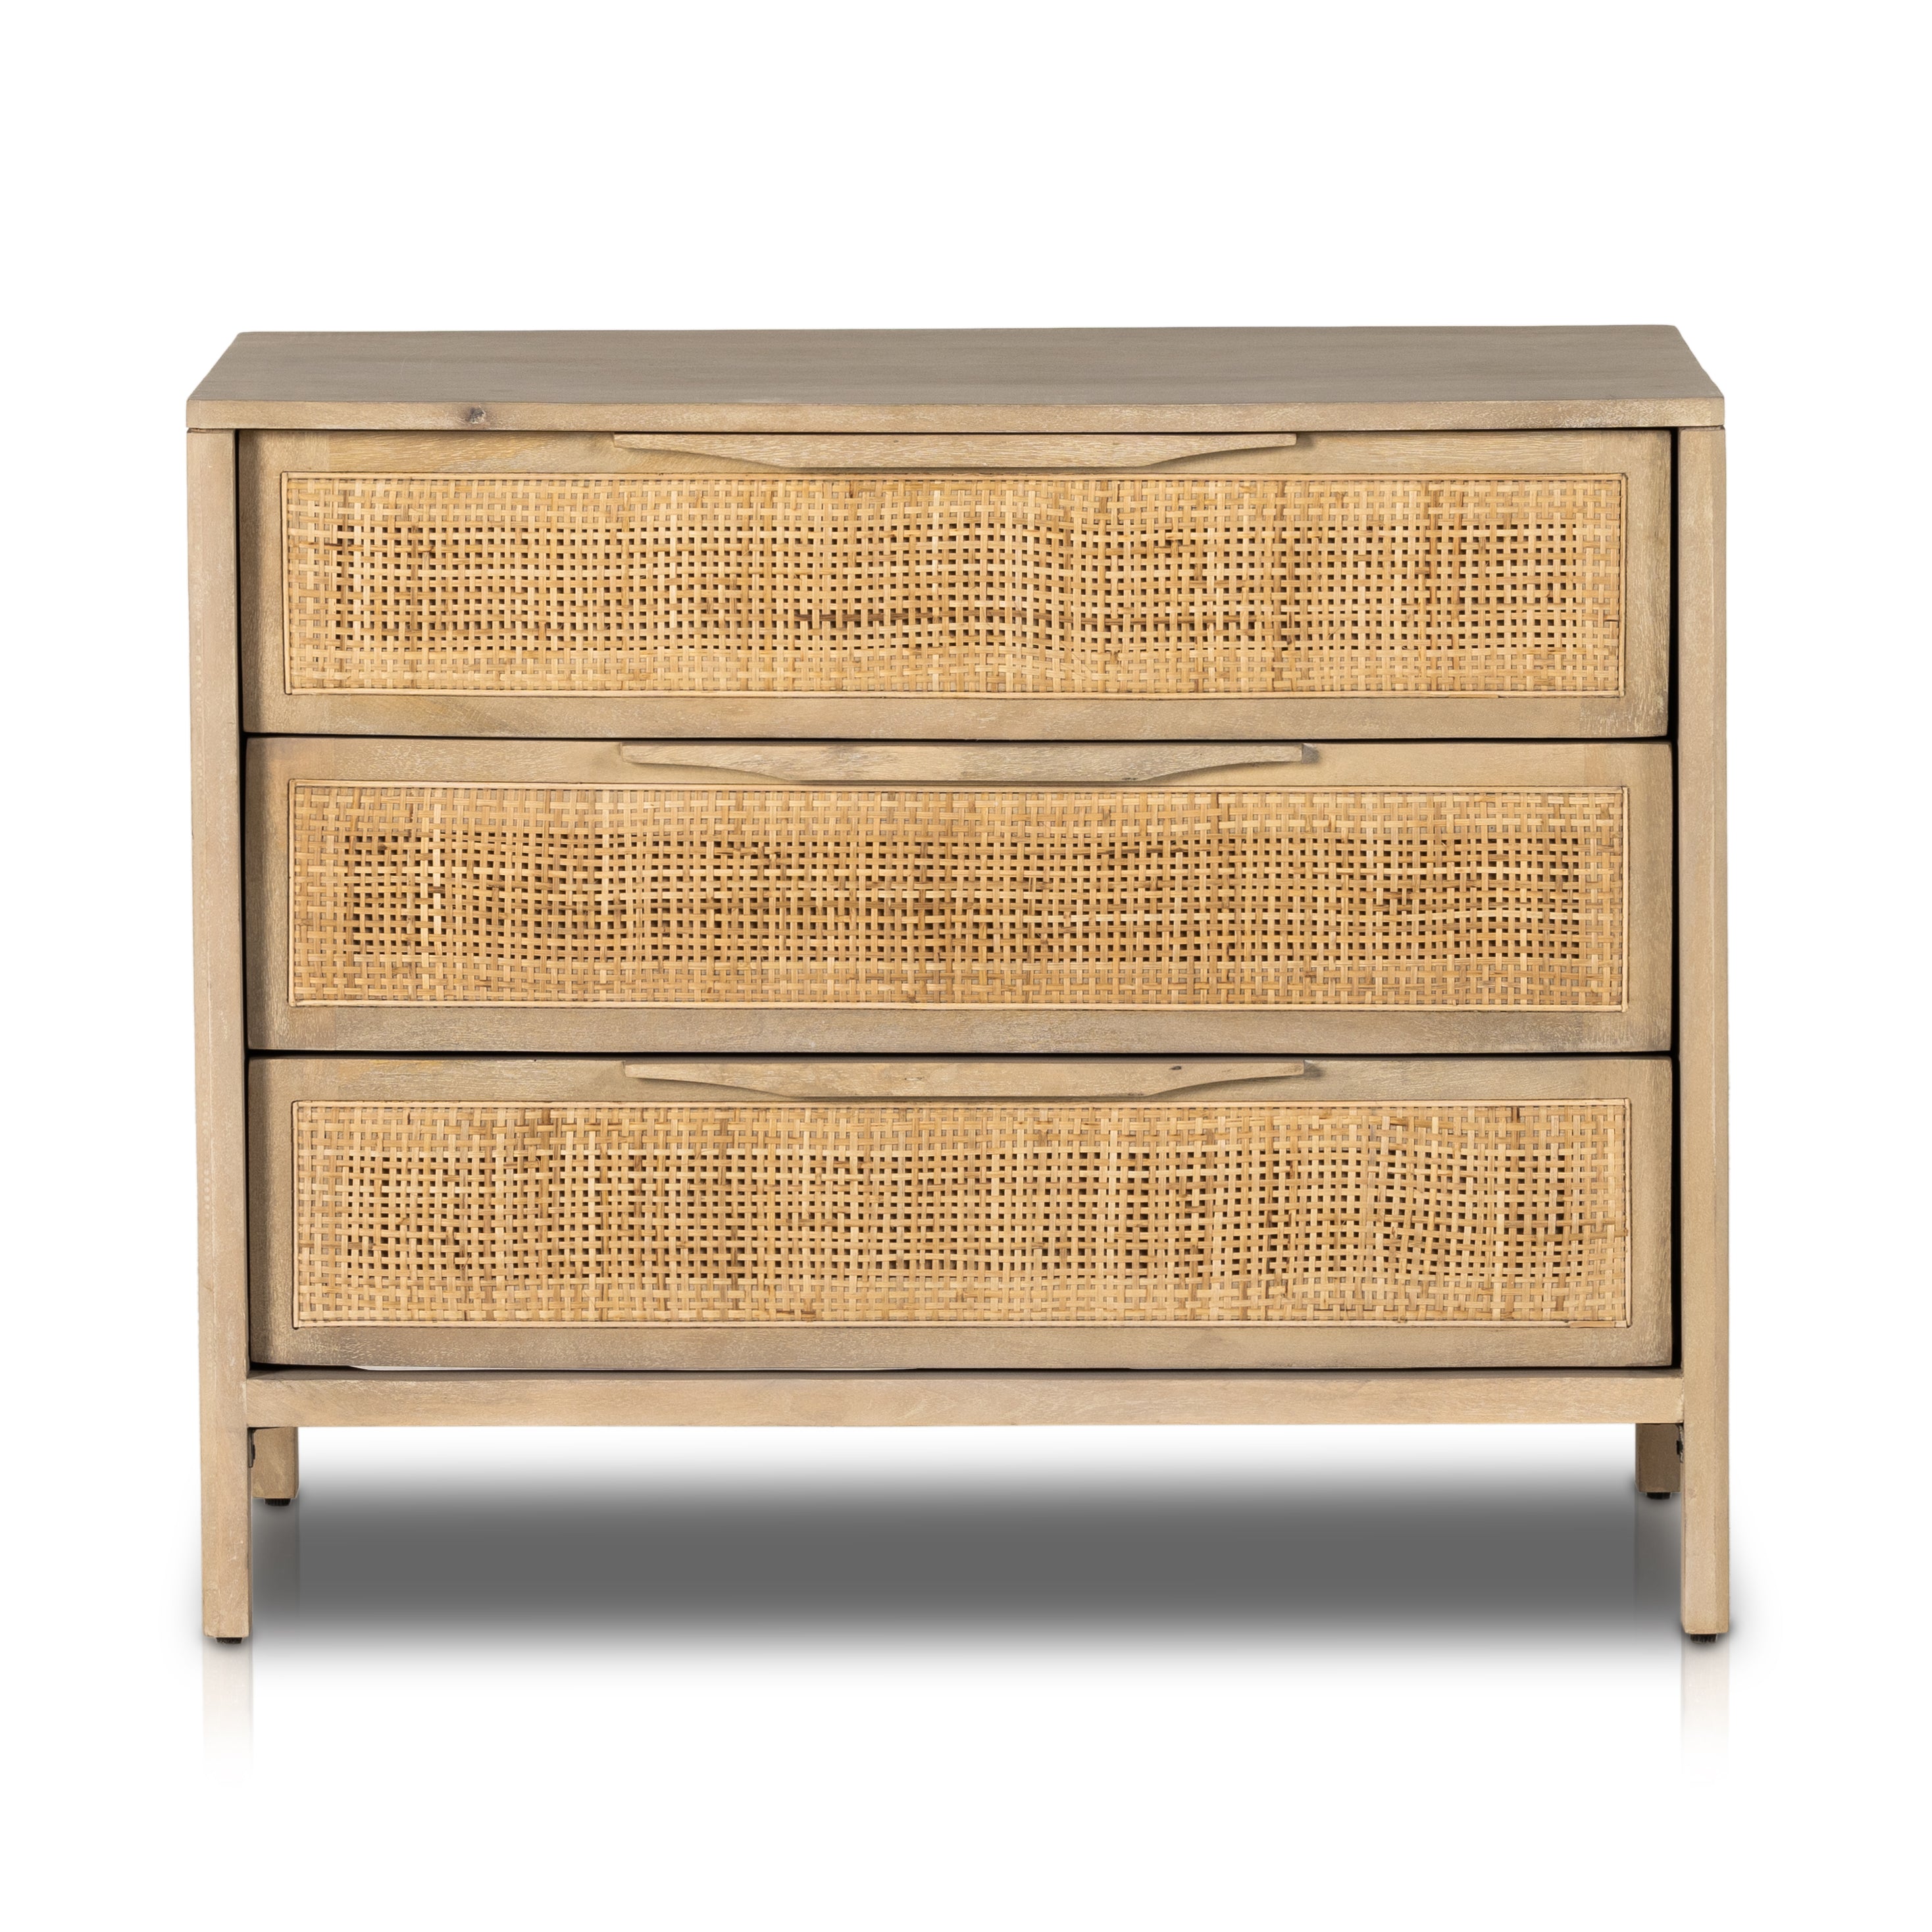 Natural mango frames inset woven cane, for a light, textural look with organic allure. Three spacious drawers provide plenty of closed storage. Amethyst Home provides interior design, new home construction design consulting, vintage area rugs, and lighting in the Laguna Beach metro area.